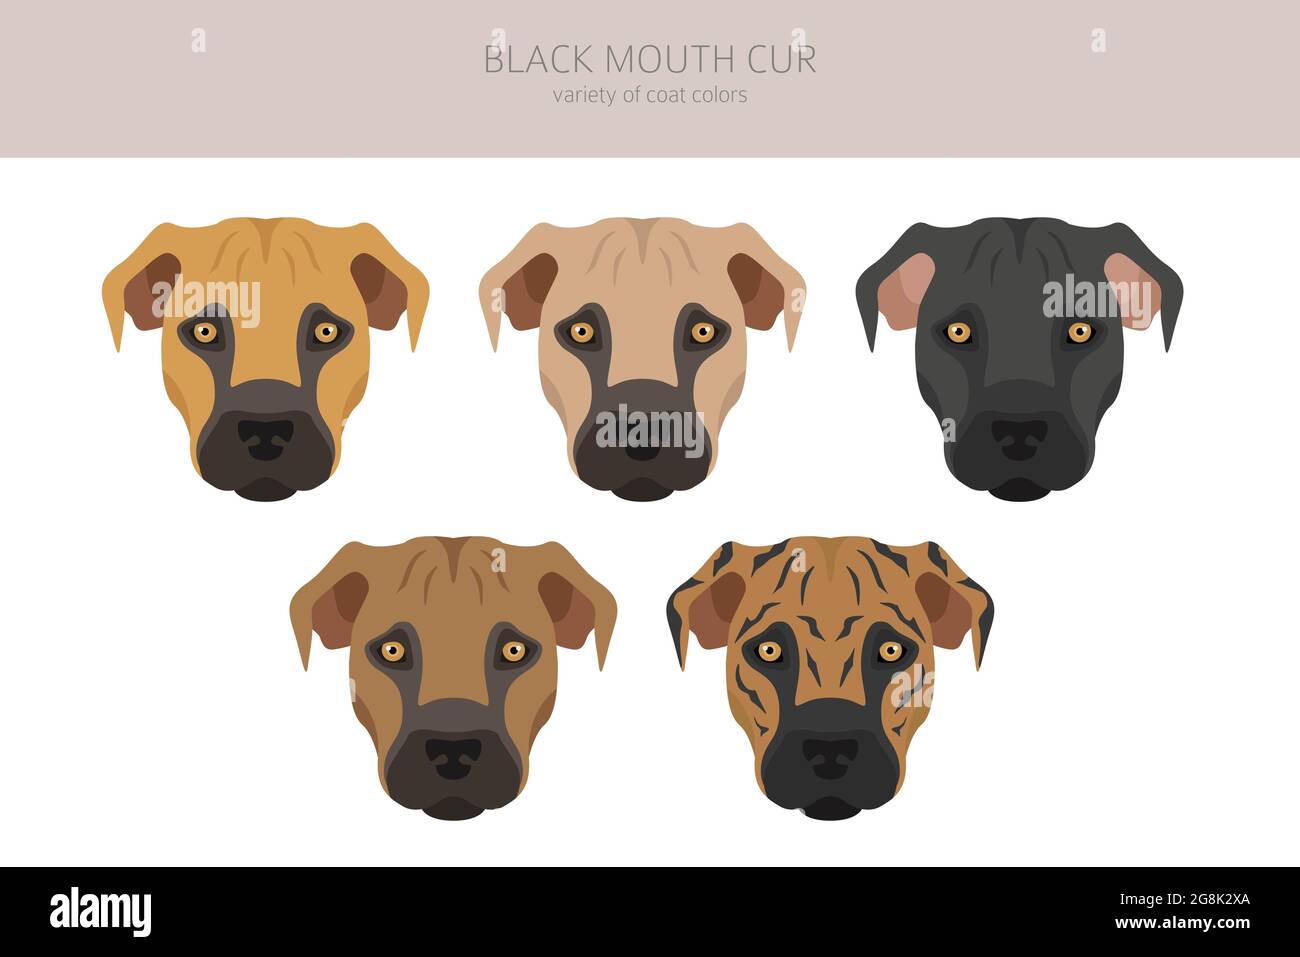 are black mouth curs good dogs